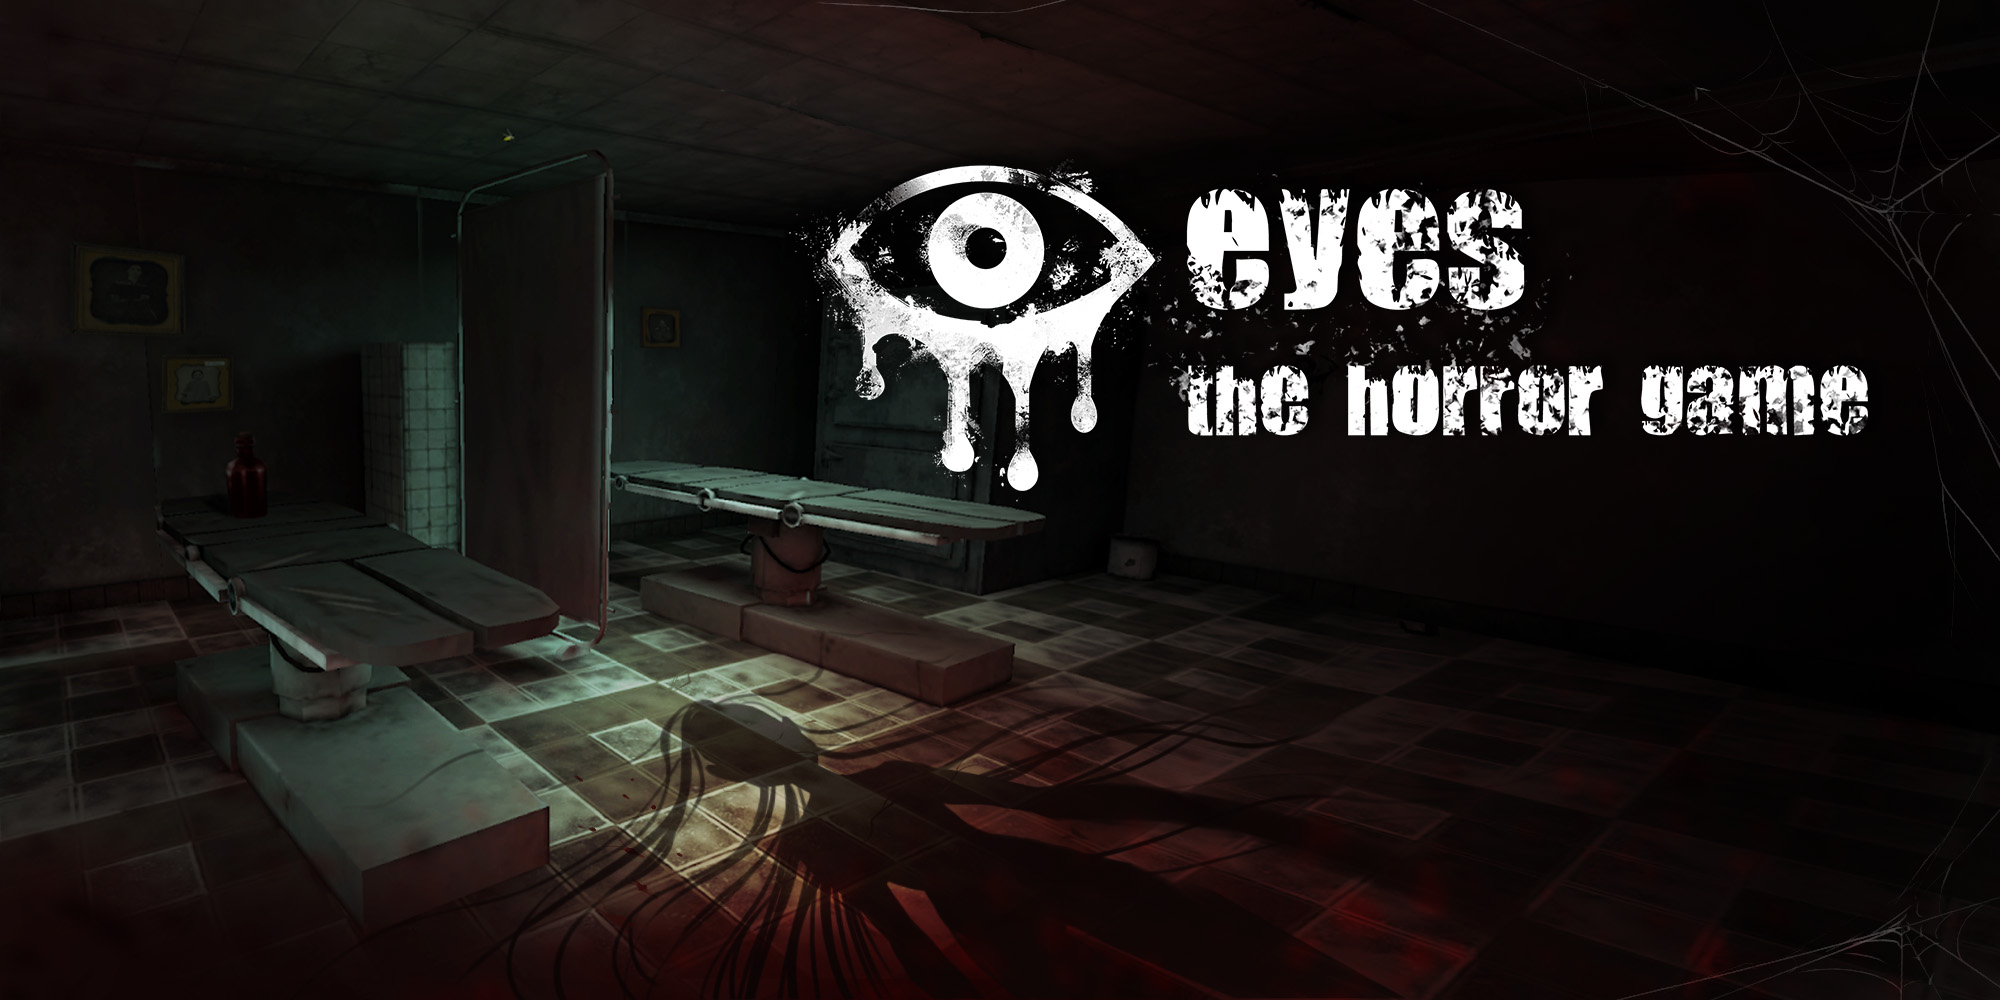 (Eyes) Les yeux - Mobile Horror Story